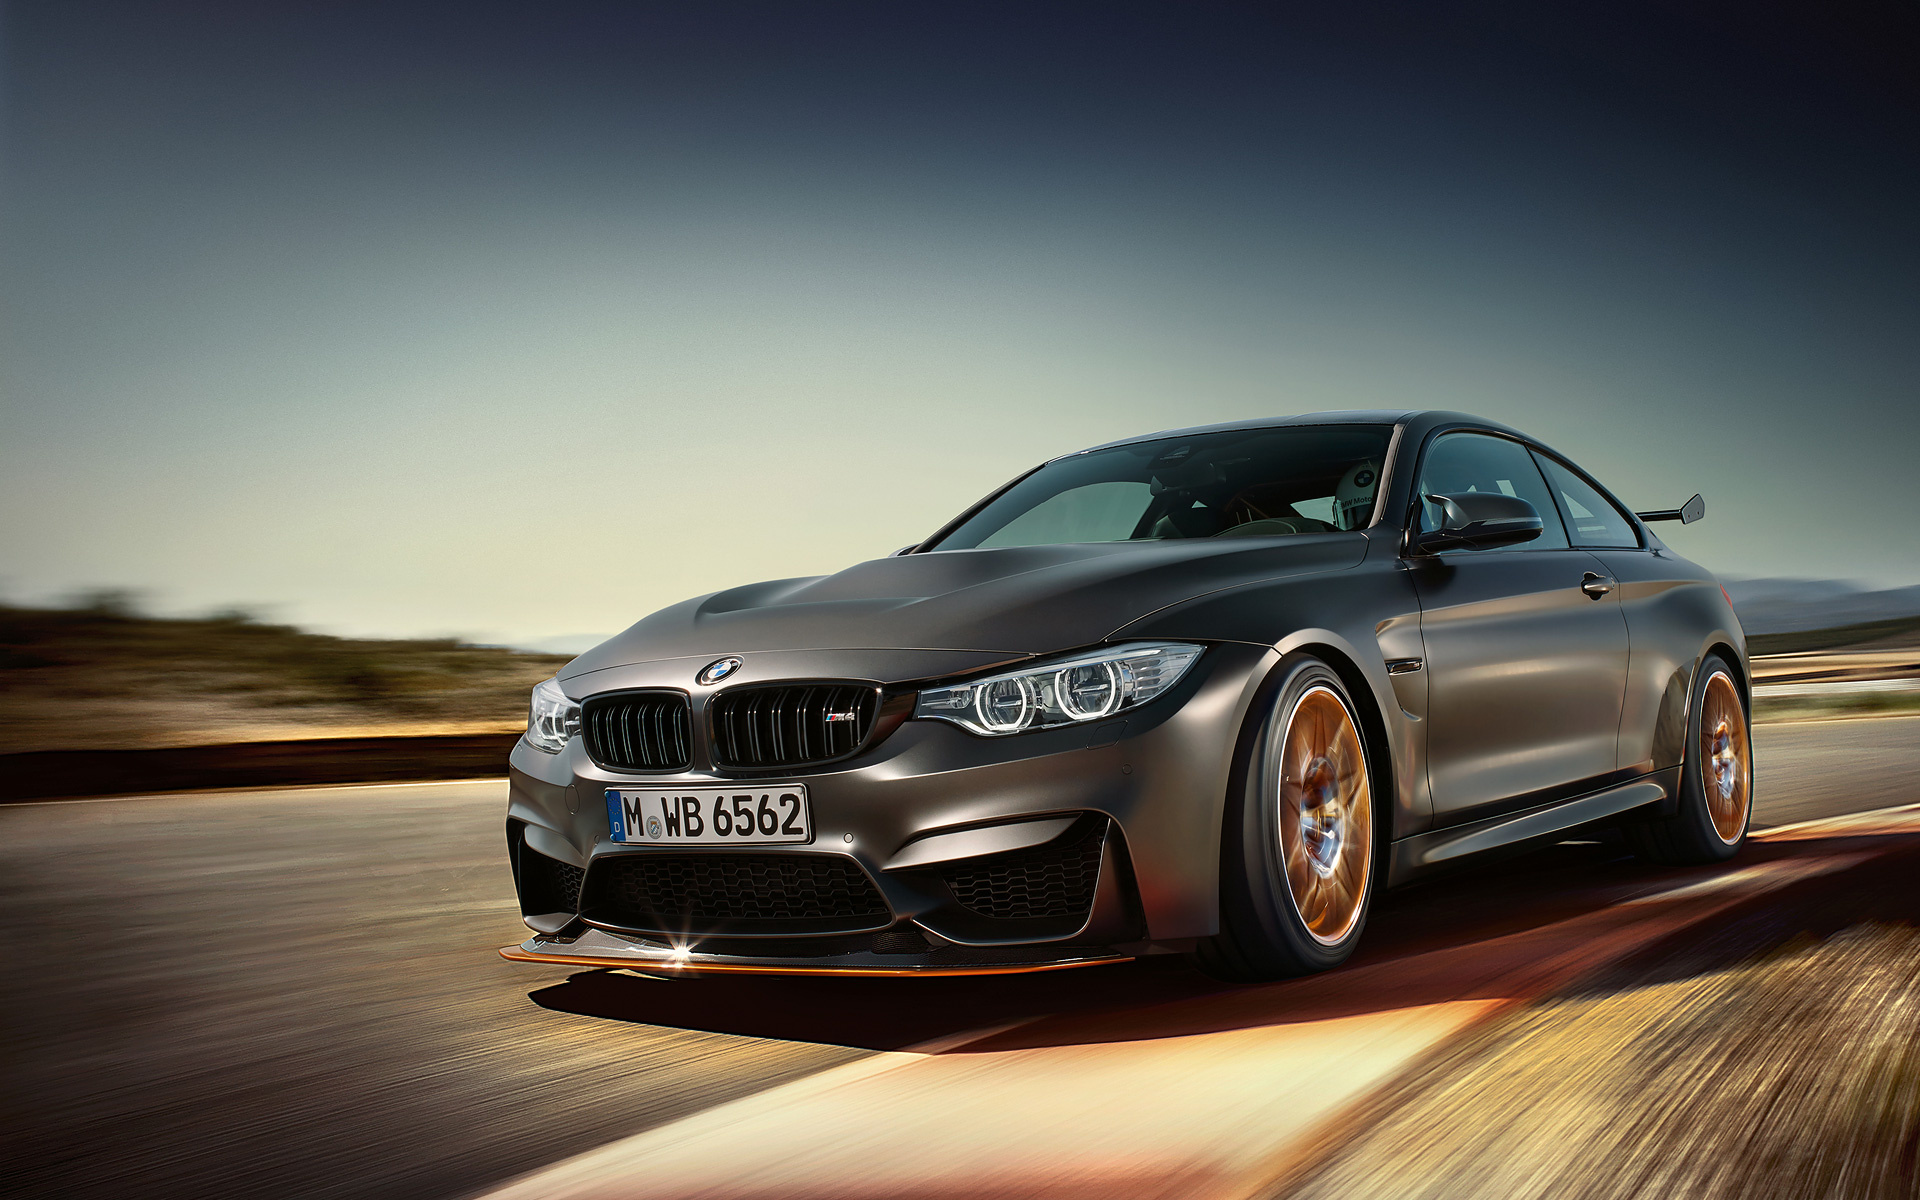 BMW M4, High-quality wallpapers, GTS variant, Exhilarating driving experience, 1920x1200 HD Desktop